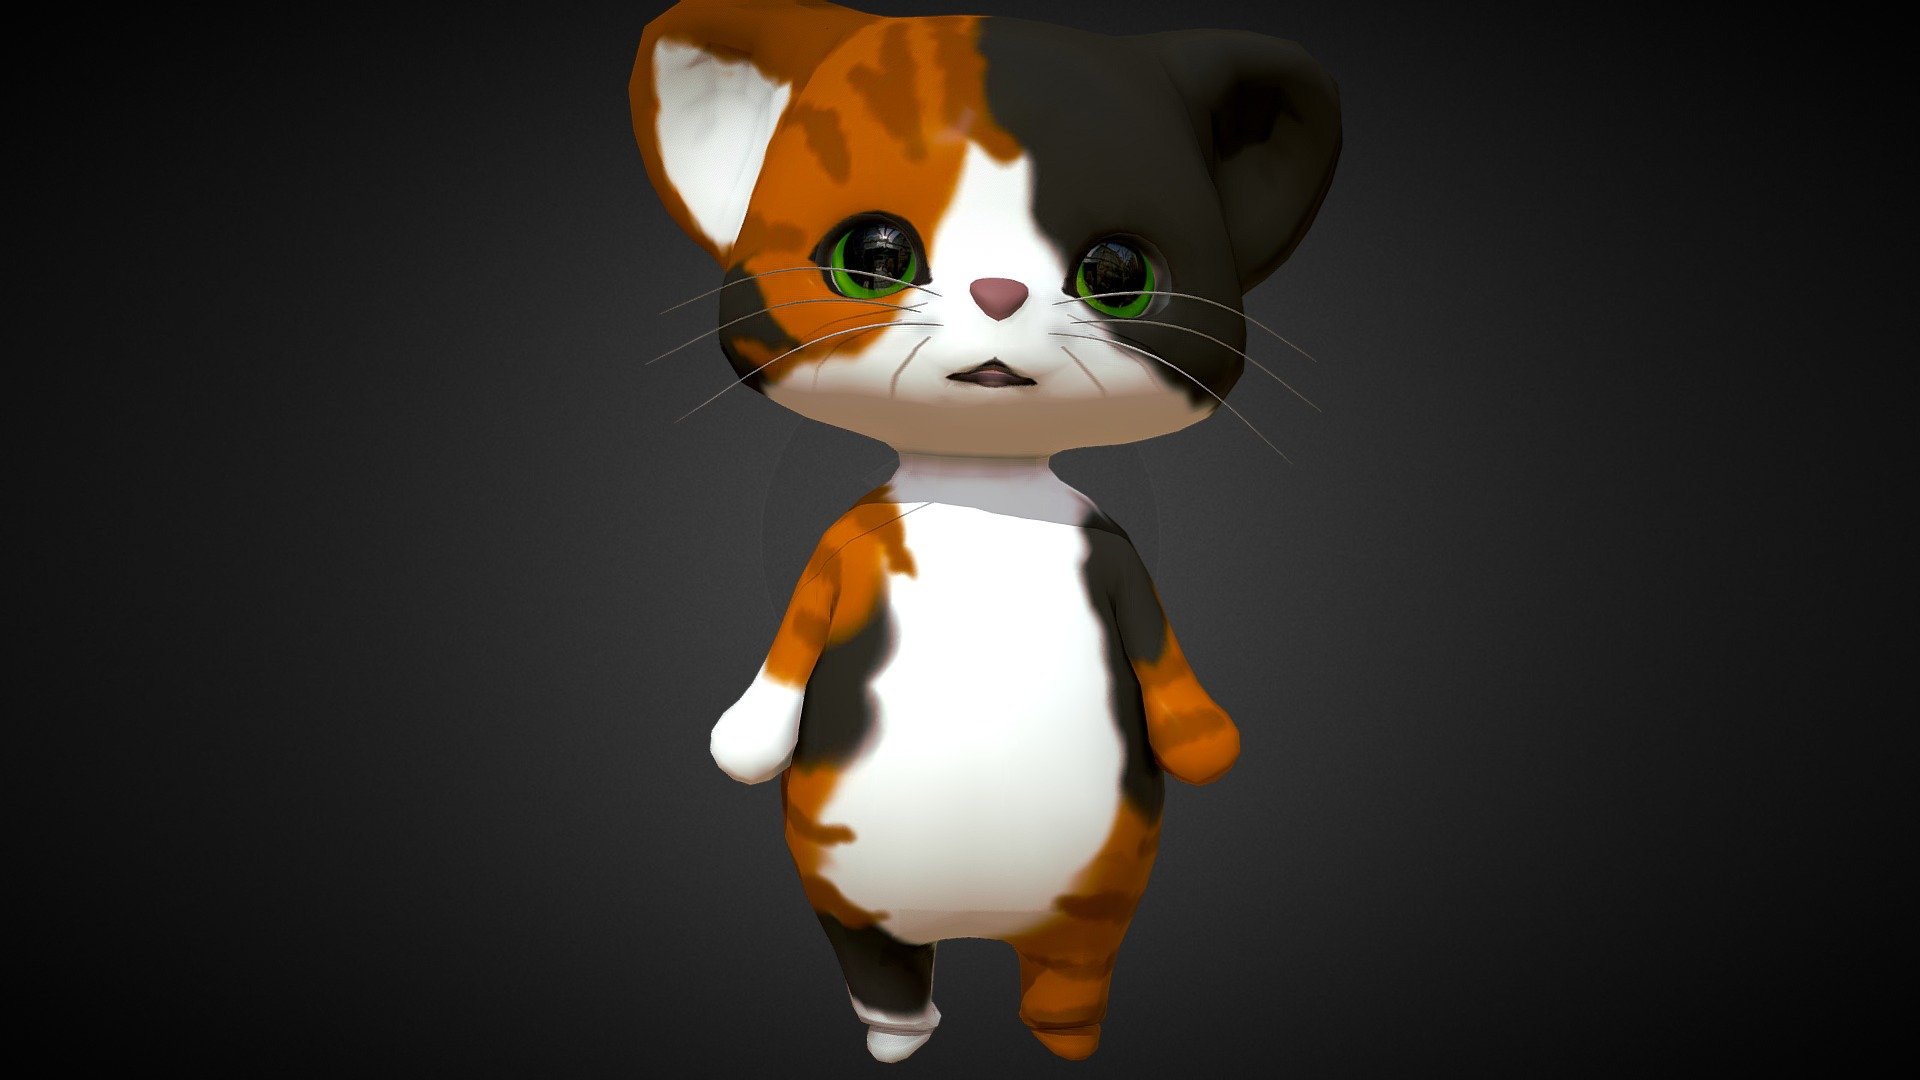 DOWNLOAD THIS GREAT ANIMATED CARTOON 3D model,
This is a 3D of a high-end photorealistic 3D models of CAT called CAT CARTOON Animated in Blender.
A great 3D Model in High Definition with an Impressive Animation Handling in all Programs
With some Overlapping textures and Materials of the highest quality

 here:  studiodedibujosanimados3drdamproductora.com/?hl=es
289764 - ID of CAT 3D MODEL Animated AND FACIAL RIG
Originally created with 3ds Max 2019 and saved as 3ds Max 2021 

SCENE objects:

You can check the full list of objects via print screen in presentation images

SCALE:





Model is built to real-world scale

metric = centimeters

1 unit = 1 centimeters



RENDERER USED for the product imagery:




Vray 3.60

render parameters are available, you can render it directly
Please to see complete gallery RDAM
Thank you for choosing my model, I hope you like it!
Rig Description

BLENDER 3.0
&lsquo;Auto rig Pro'
&lsquo;complet facial rig' - CAT CARTOON CHARACTER ANIMATED - 3D model by Rdam 3D Pictures (@rdam) 3d model